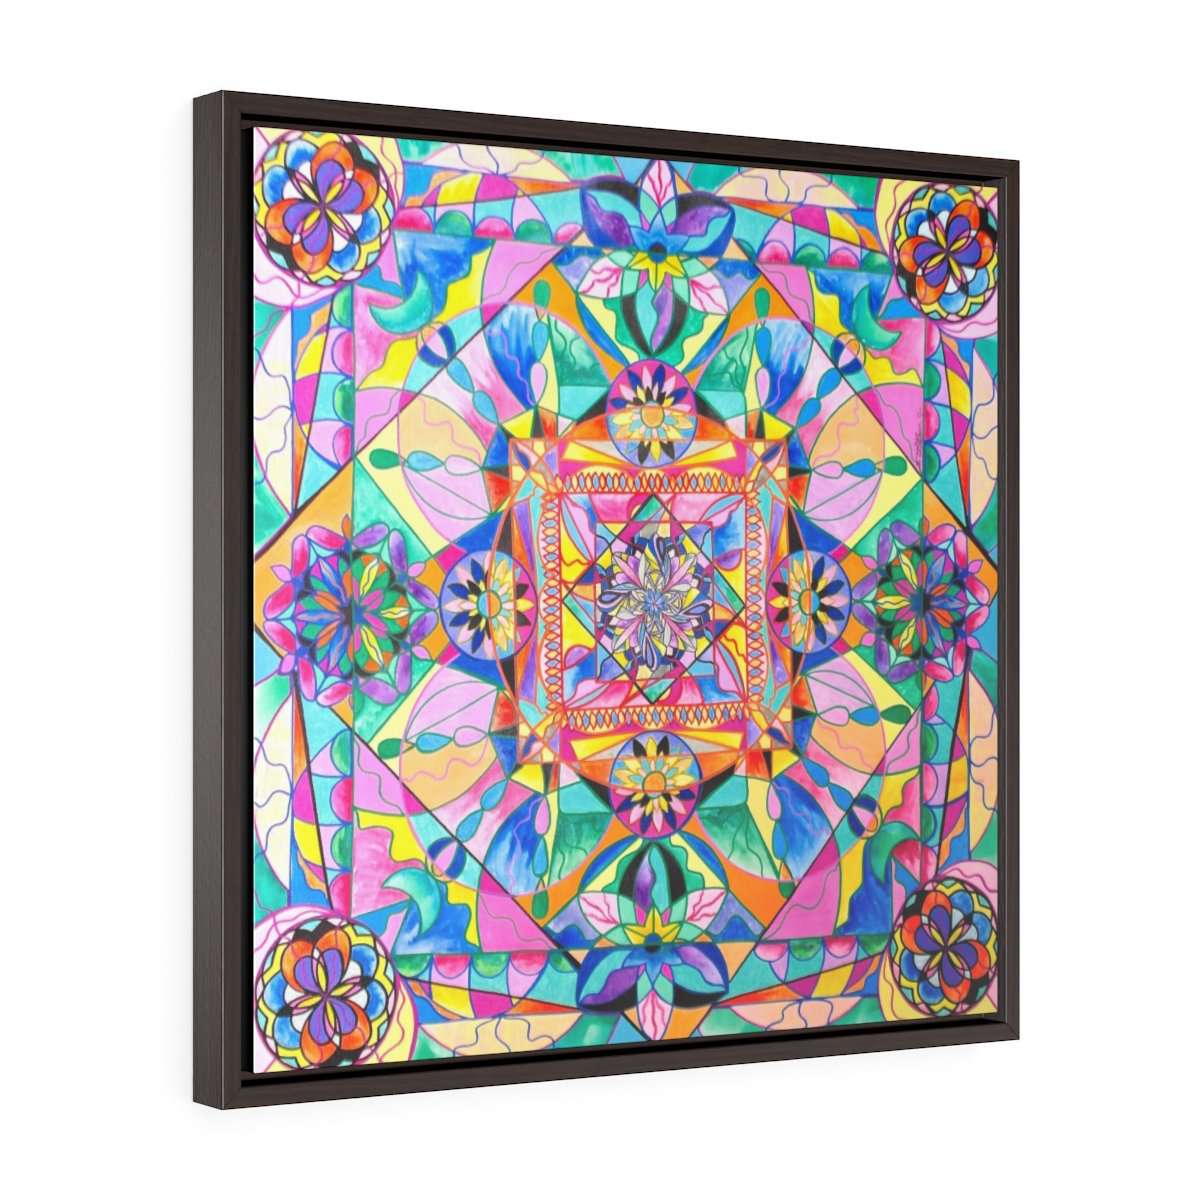 we-believe-in-helping-you-find-the-perfect-renewal-square-framed-premium-gallery-wrap-canvas-hot-on-sale_4.jpg